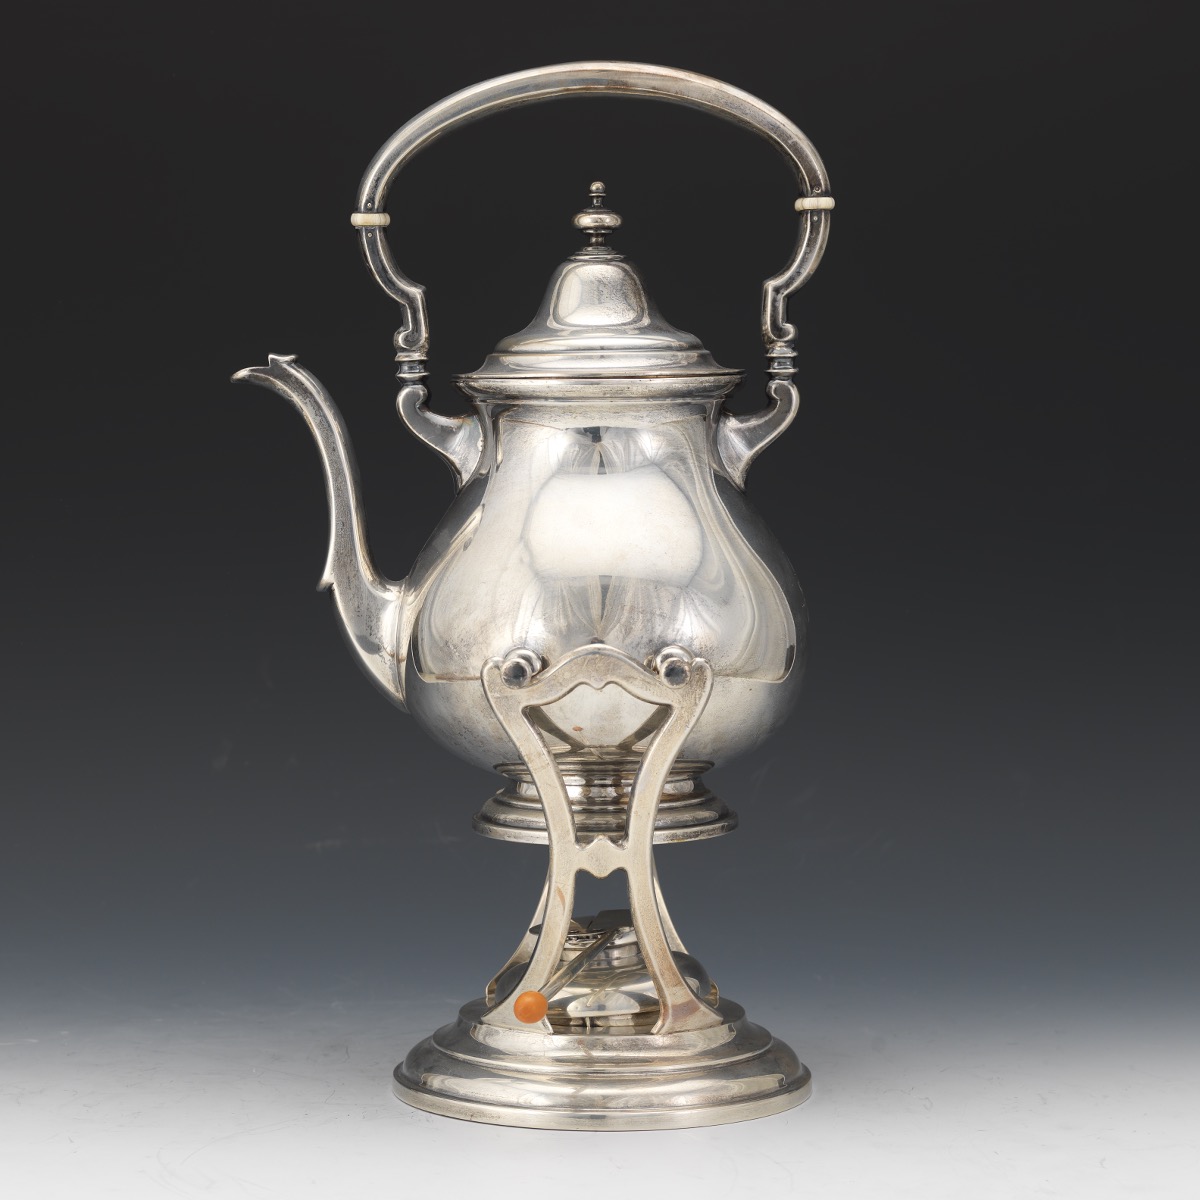 Graff, Washbourne & Dunn Sterling Silver Tea and Coffee Service - Image 14 of 20